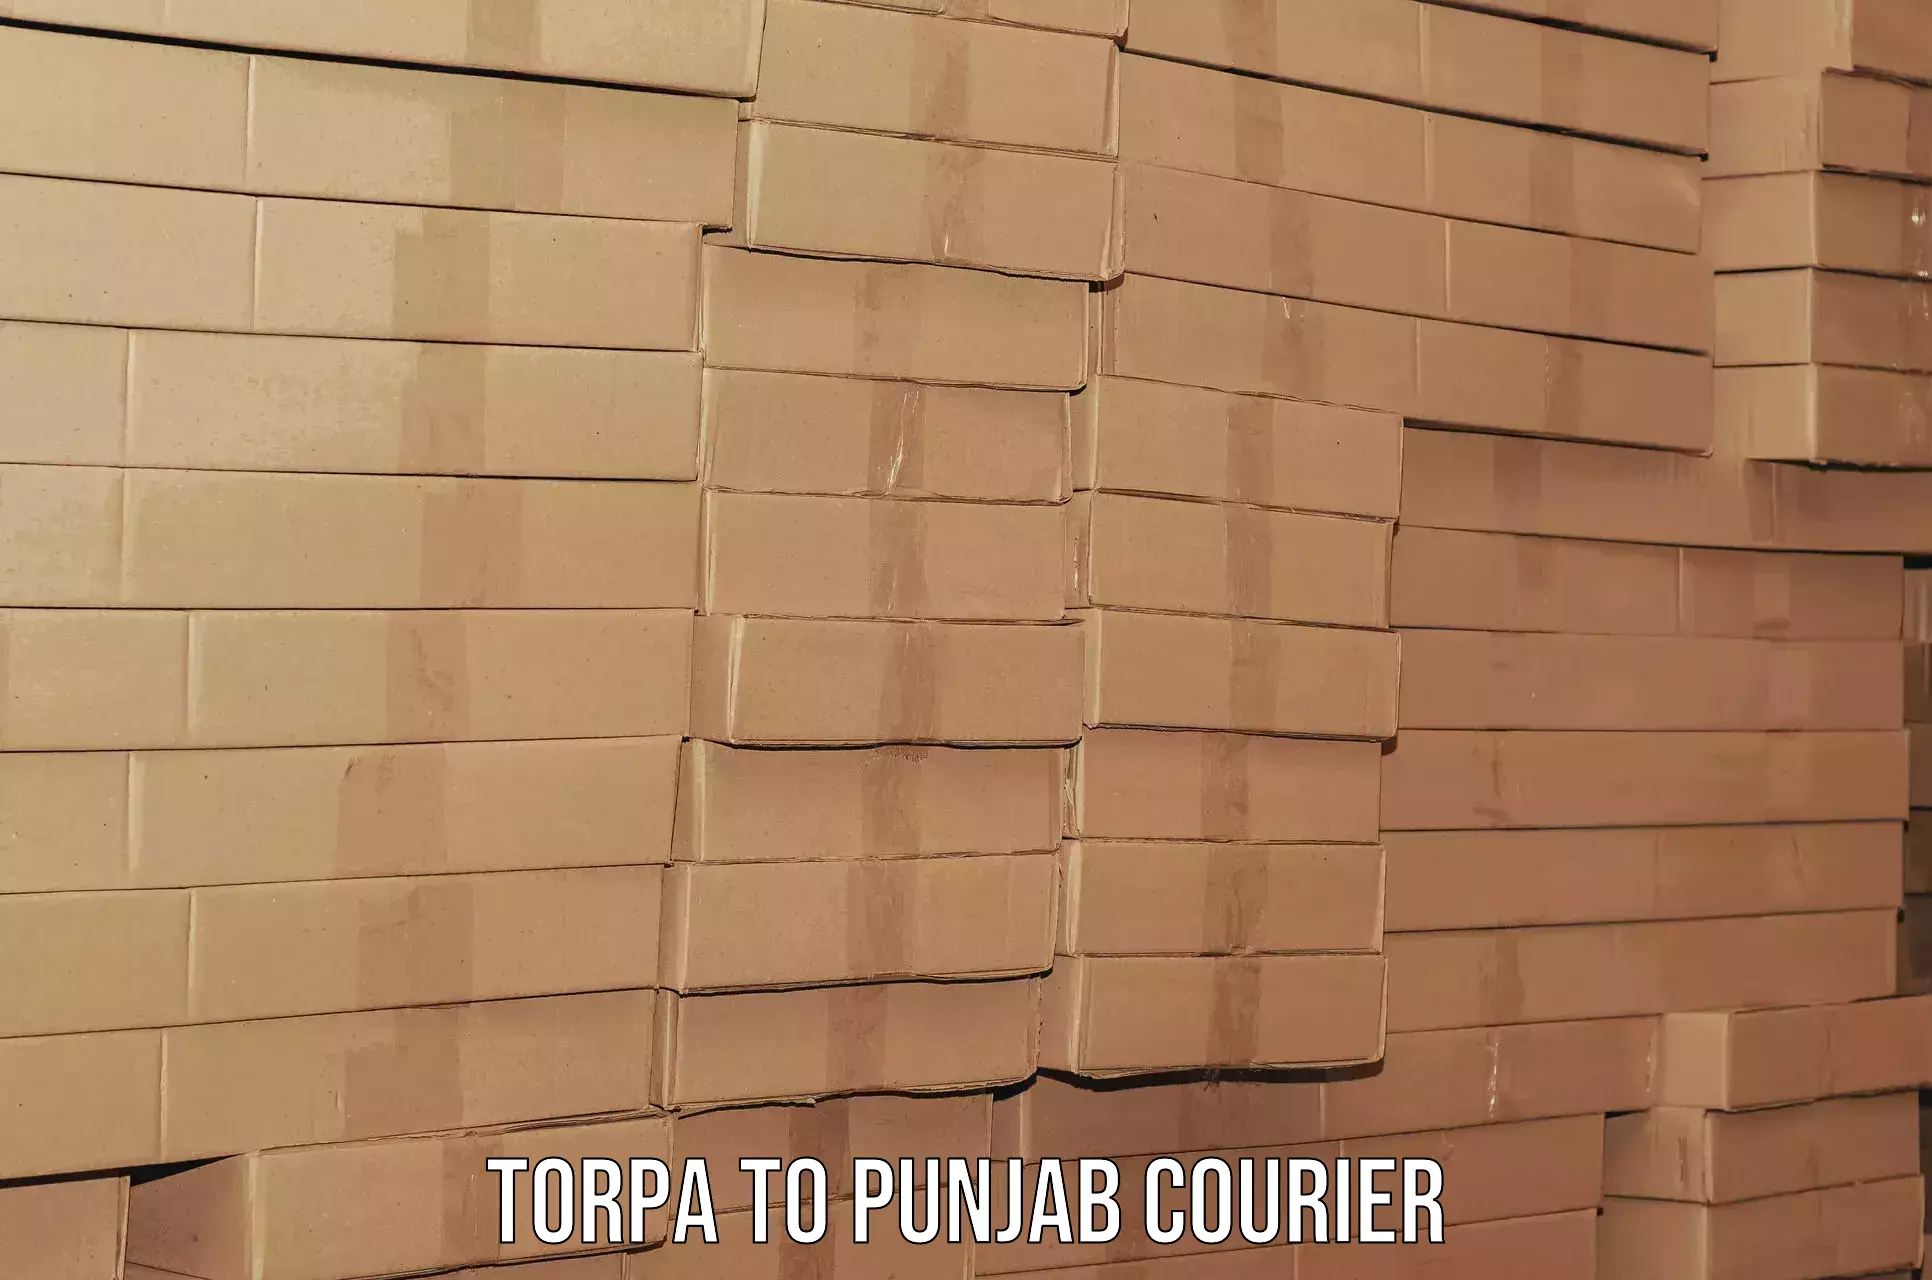 Trusted relocation experts Torpa to Punjab